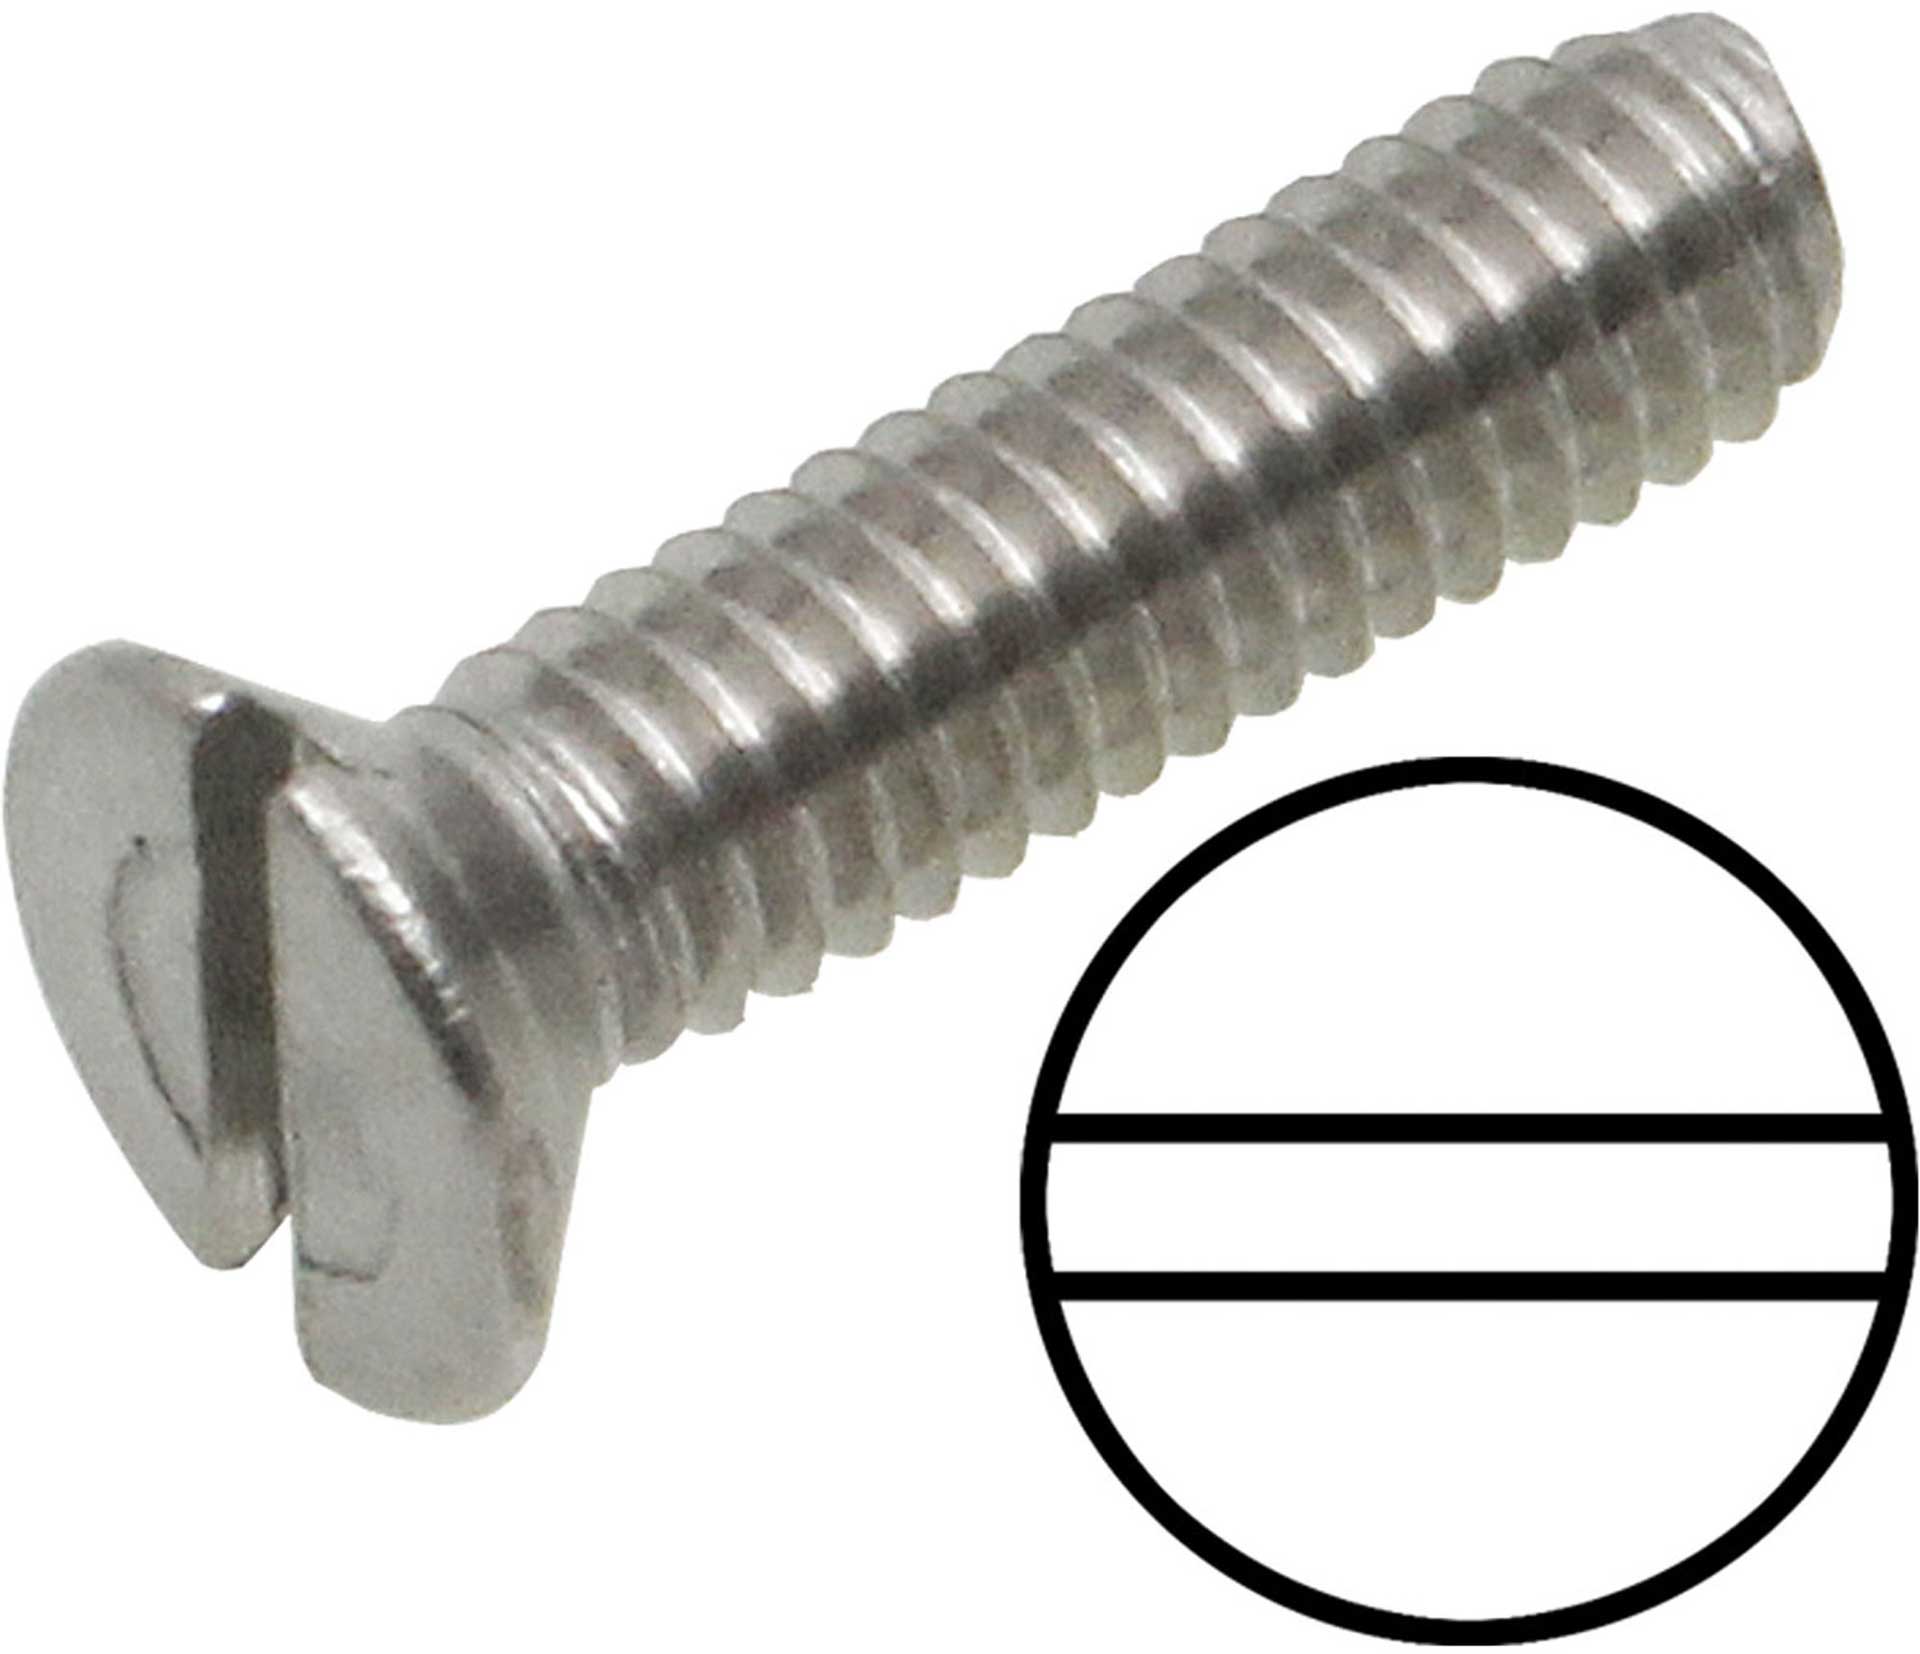 Modellbau Lindinger COUNTERSUNK SCREWS SLOTTED M2.5/10MM STAINLESS STEEL, 10PCS.